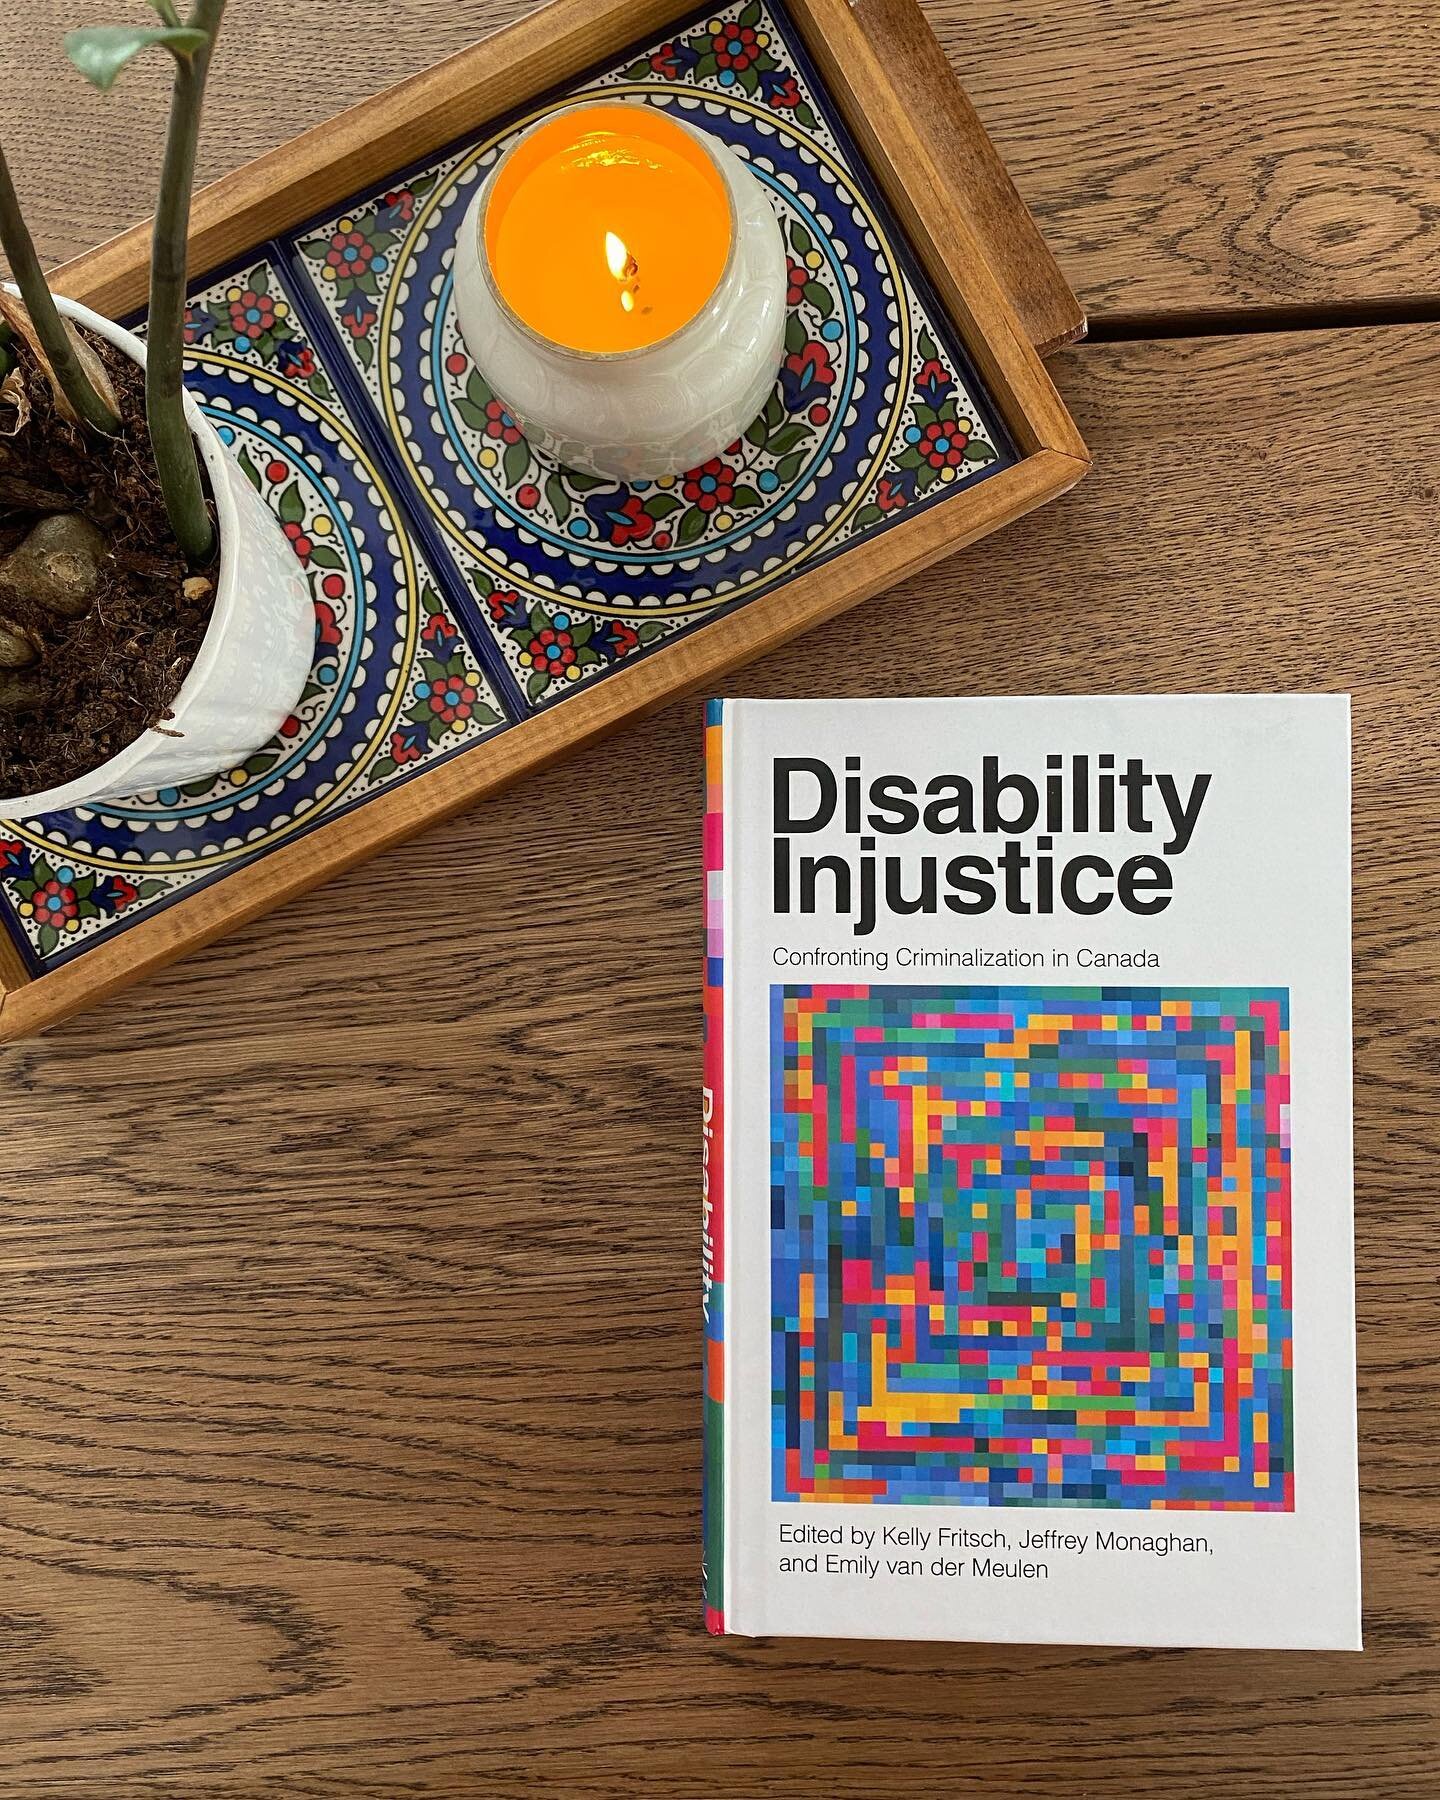 Very much looking forward to reading Disability Injustice: Confronting Criminalization in Canada! 

[ID: Disability Injustice: Confronting Criminalization in Canada, Edited by Kelly Fritsch, Jeffrey Monaghan, and Emily van der Meulen, is a white book